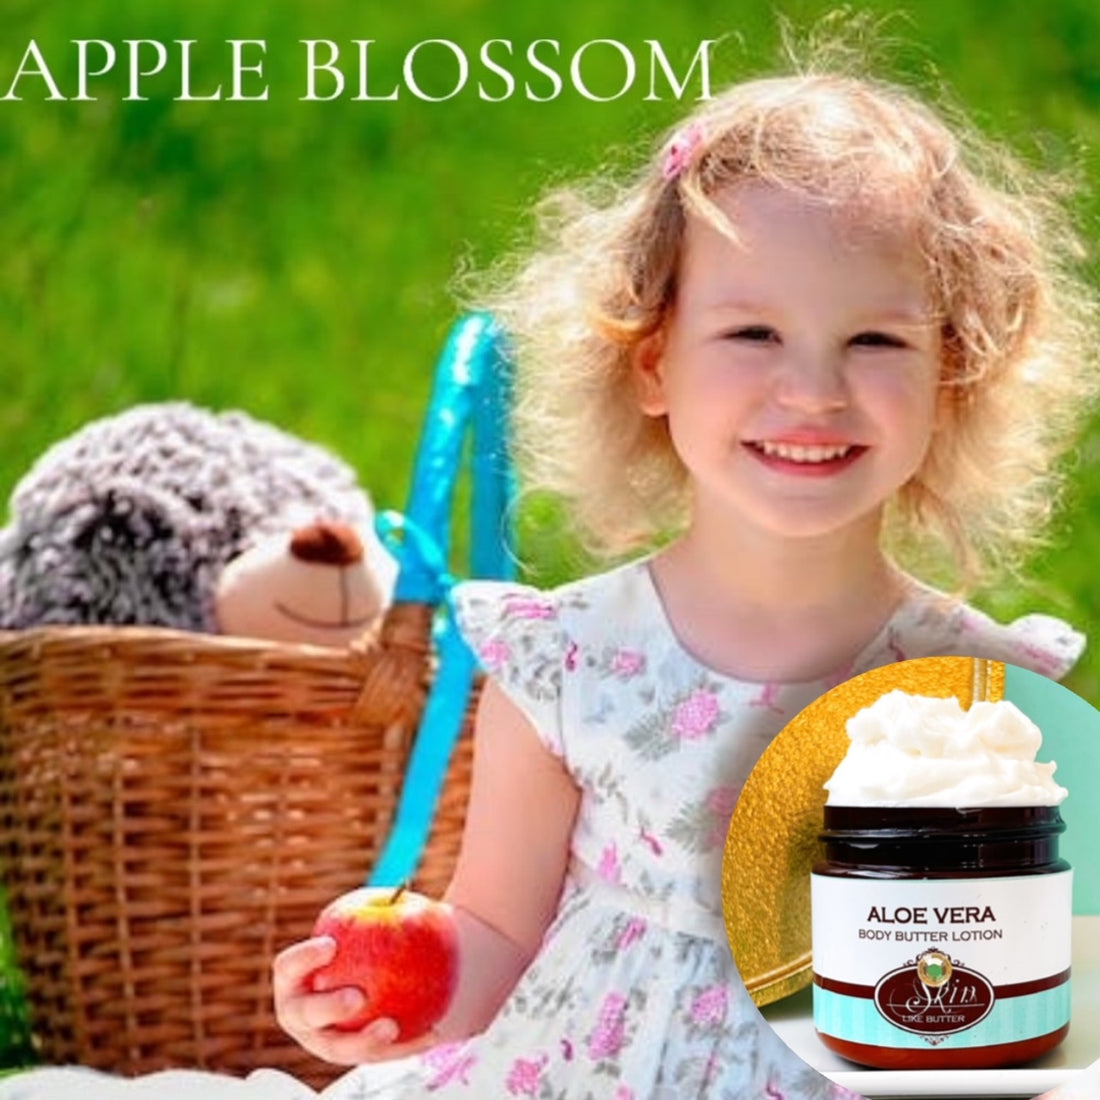 APPLE BLOSSOM scented water free, vegan non-greasy Body Butter Lotion